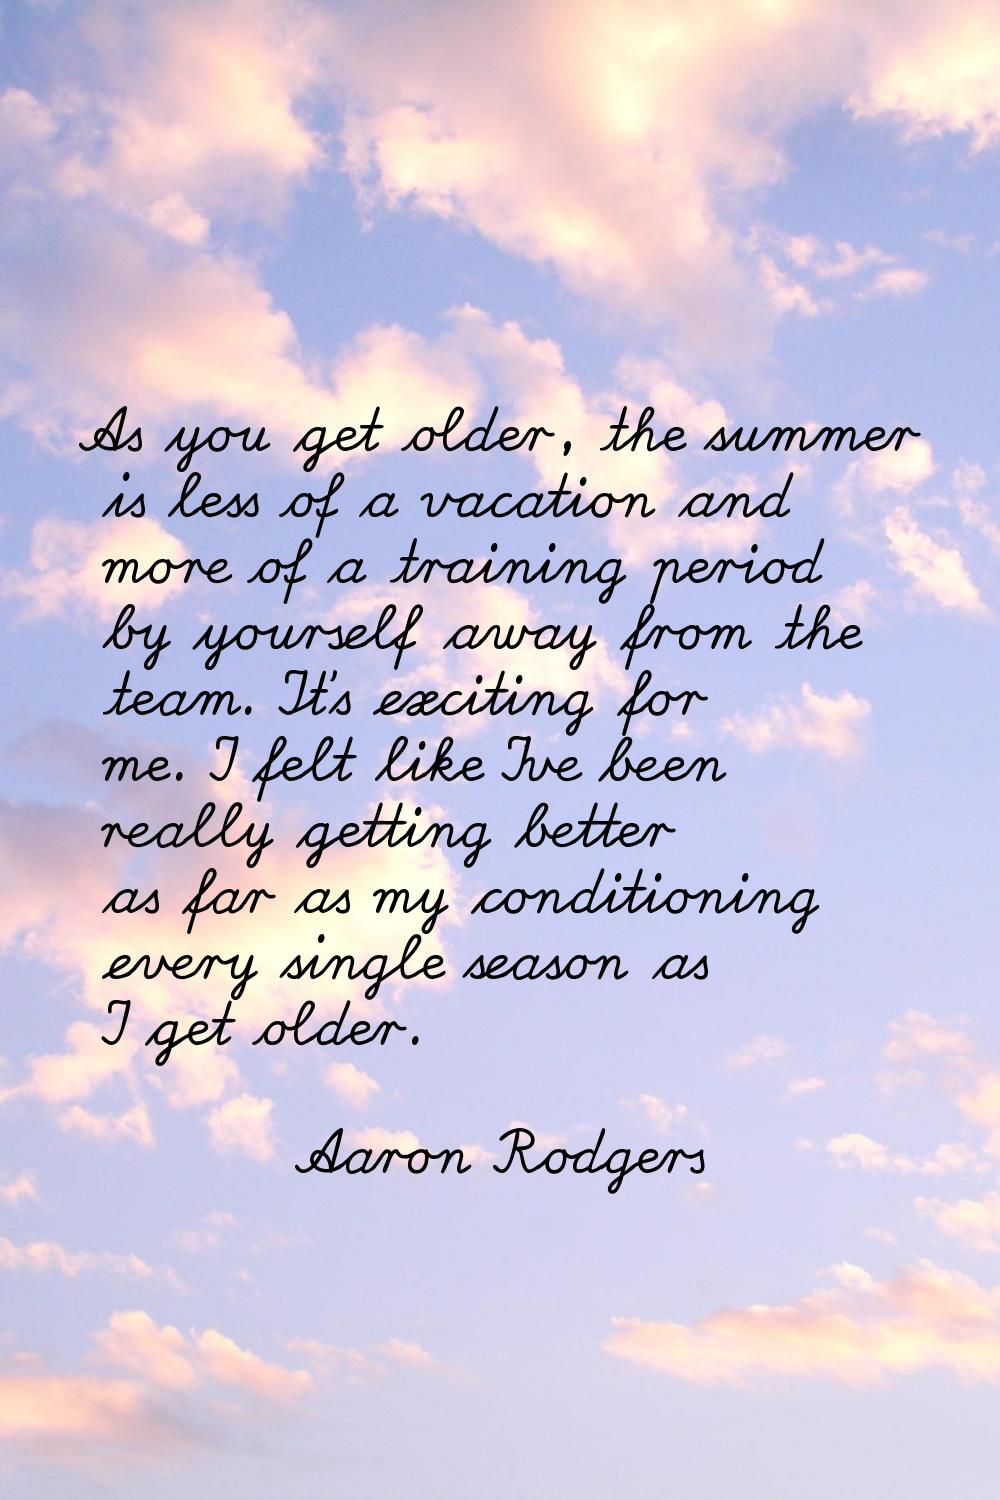 As you get older, the summer is less of a vacation and more of a training period by yourself away f